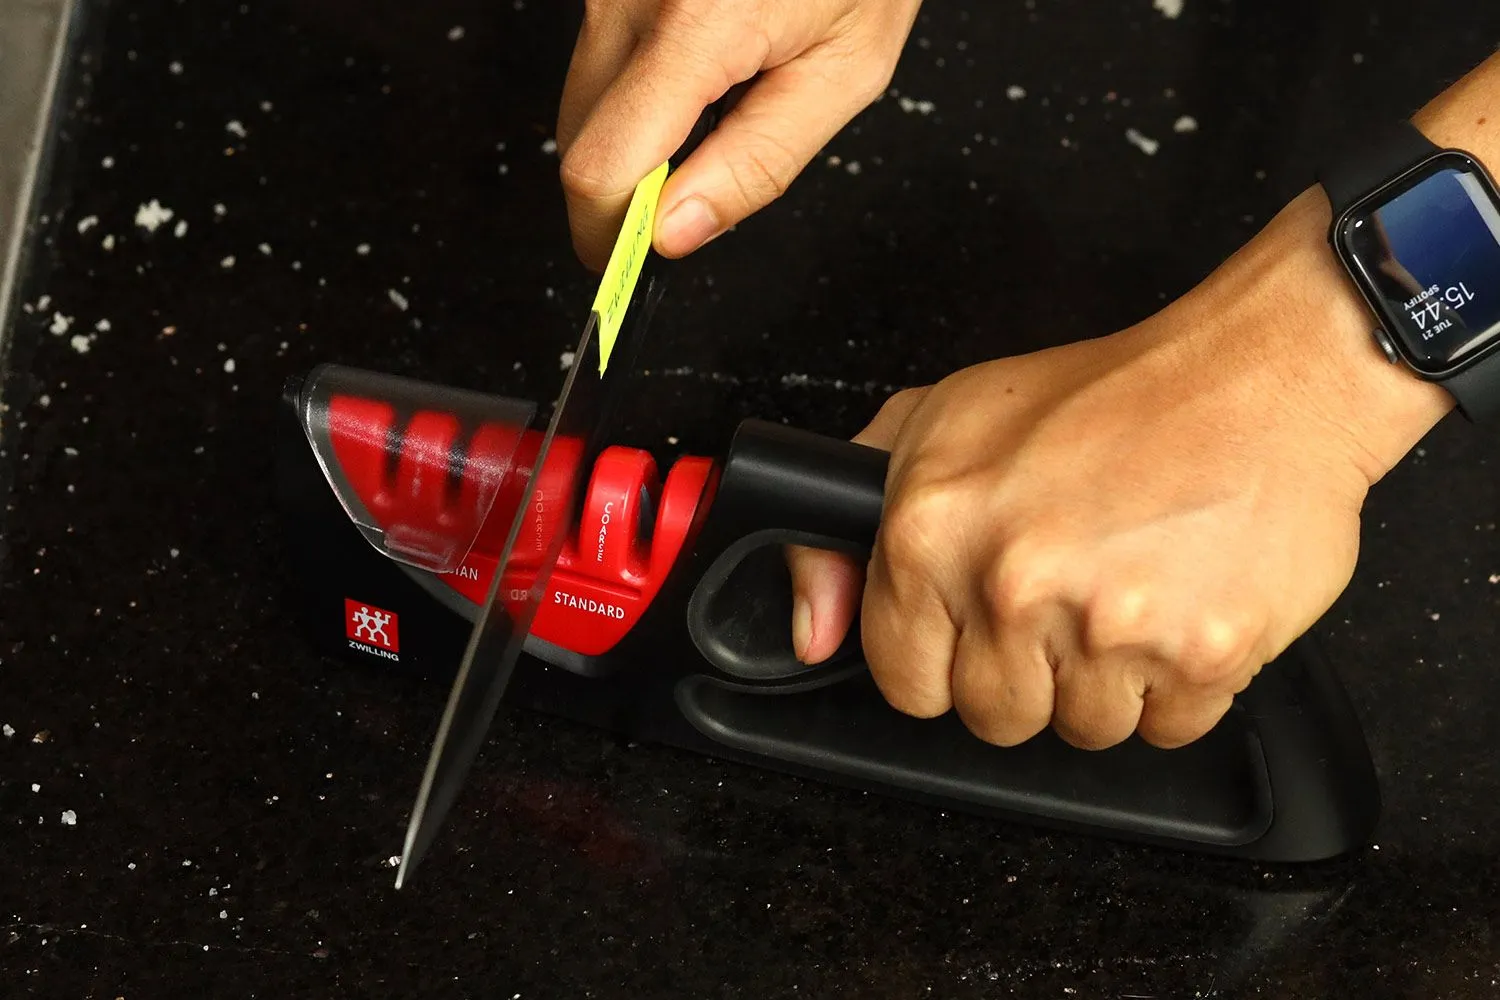 Zwilling 2-Stage Pull-Through Sharpener